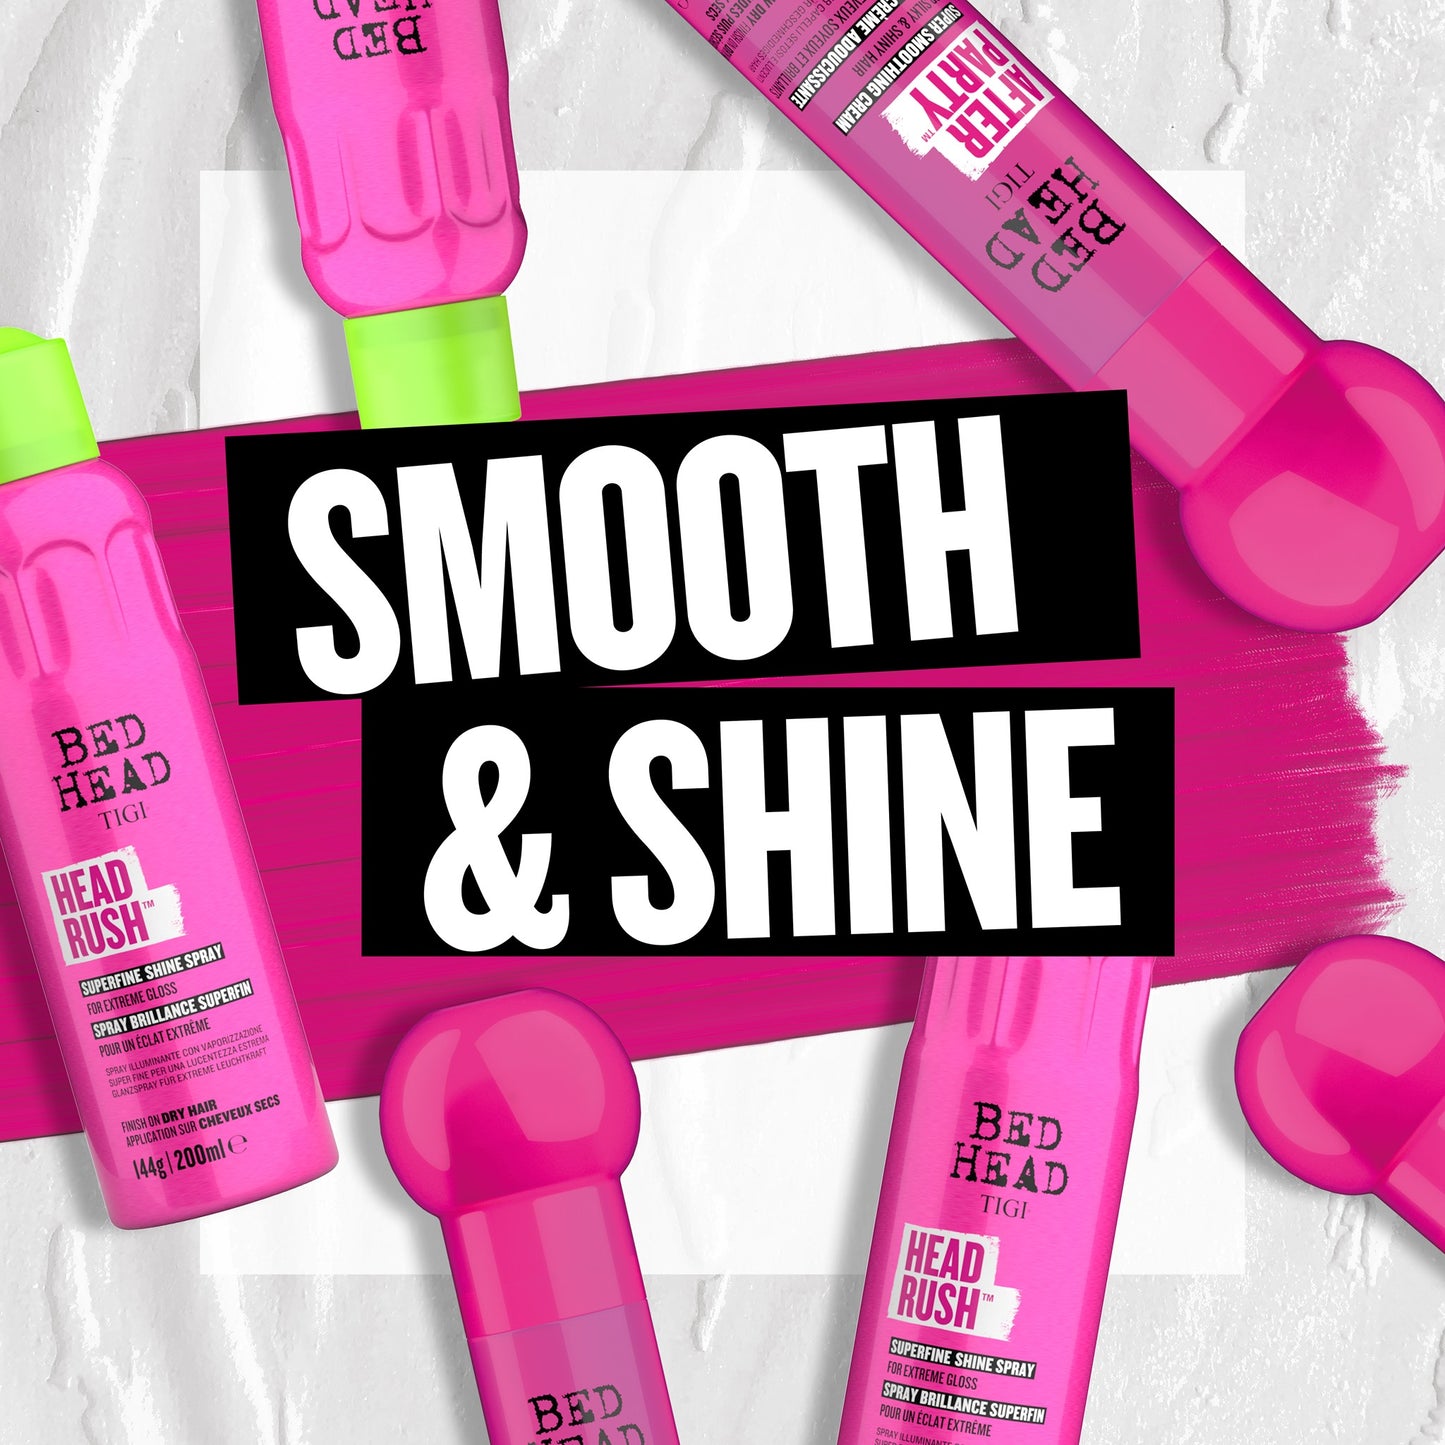 TIGI BED HEAD After Party Smoothing Cream